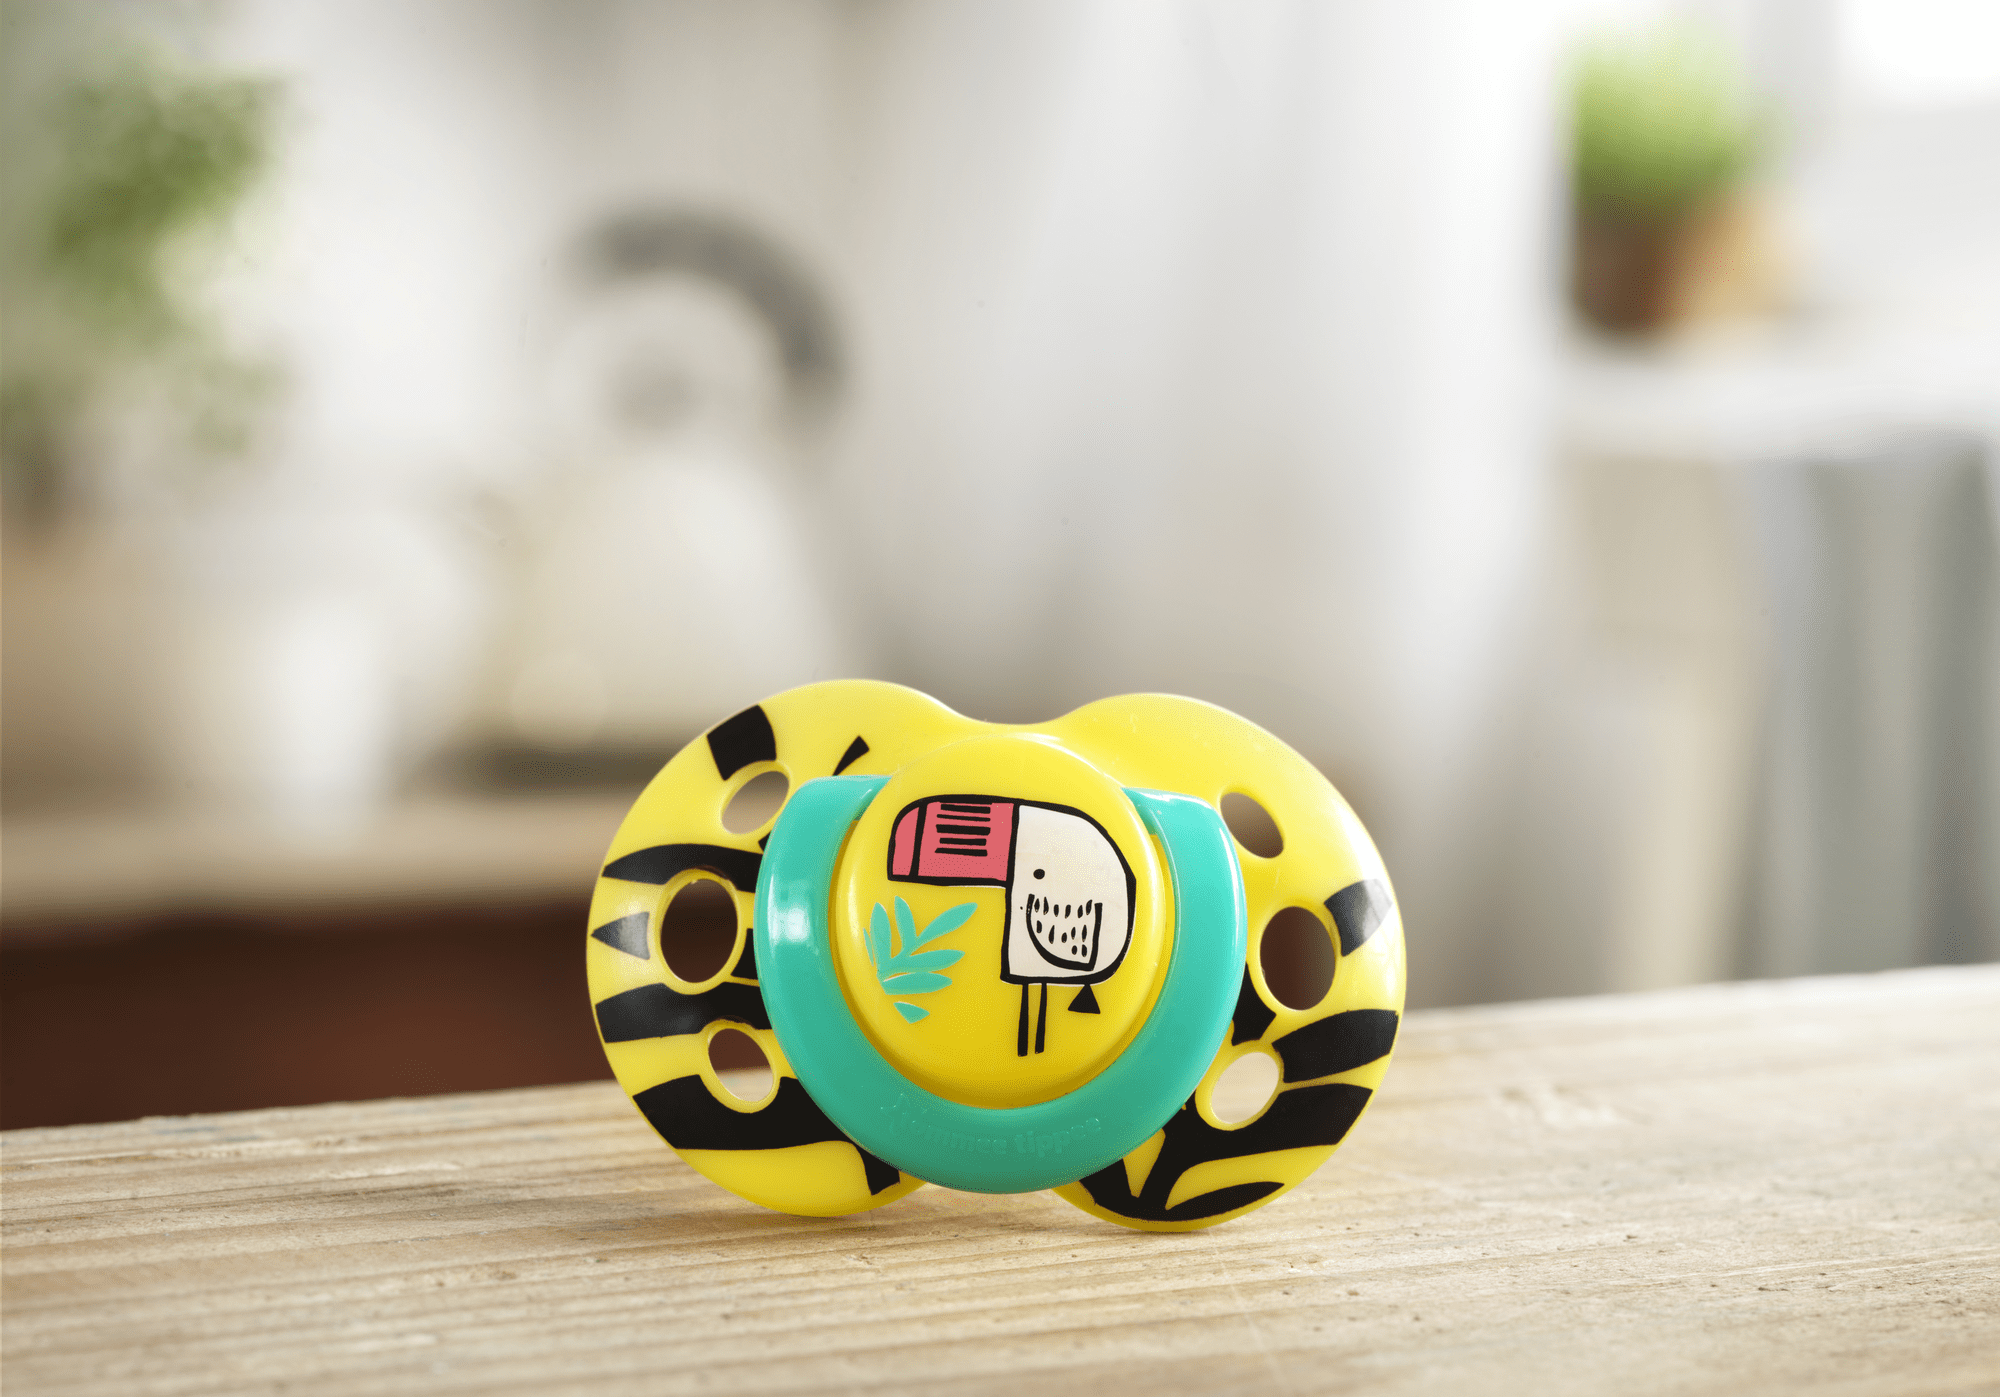 Chupete de silicona - Fun Style - tommee tippee